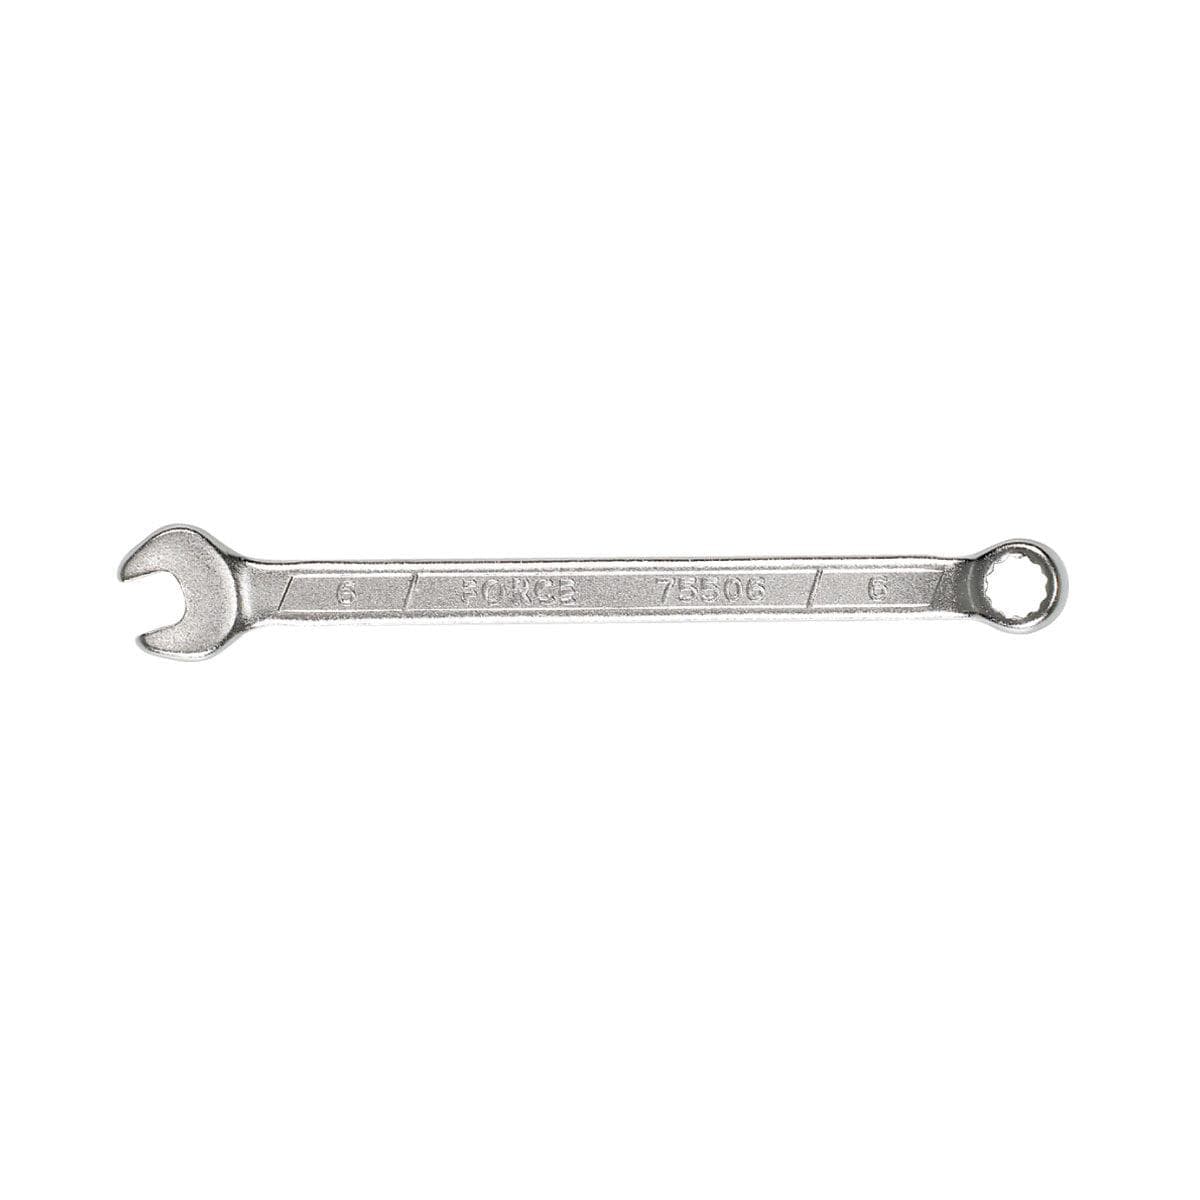 Cyclo 22Mm Open/Ring Spanner: